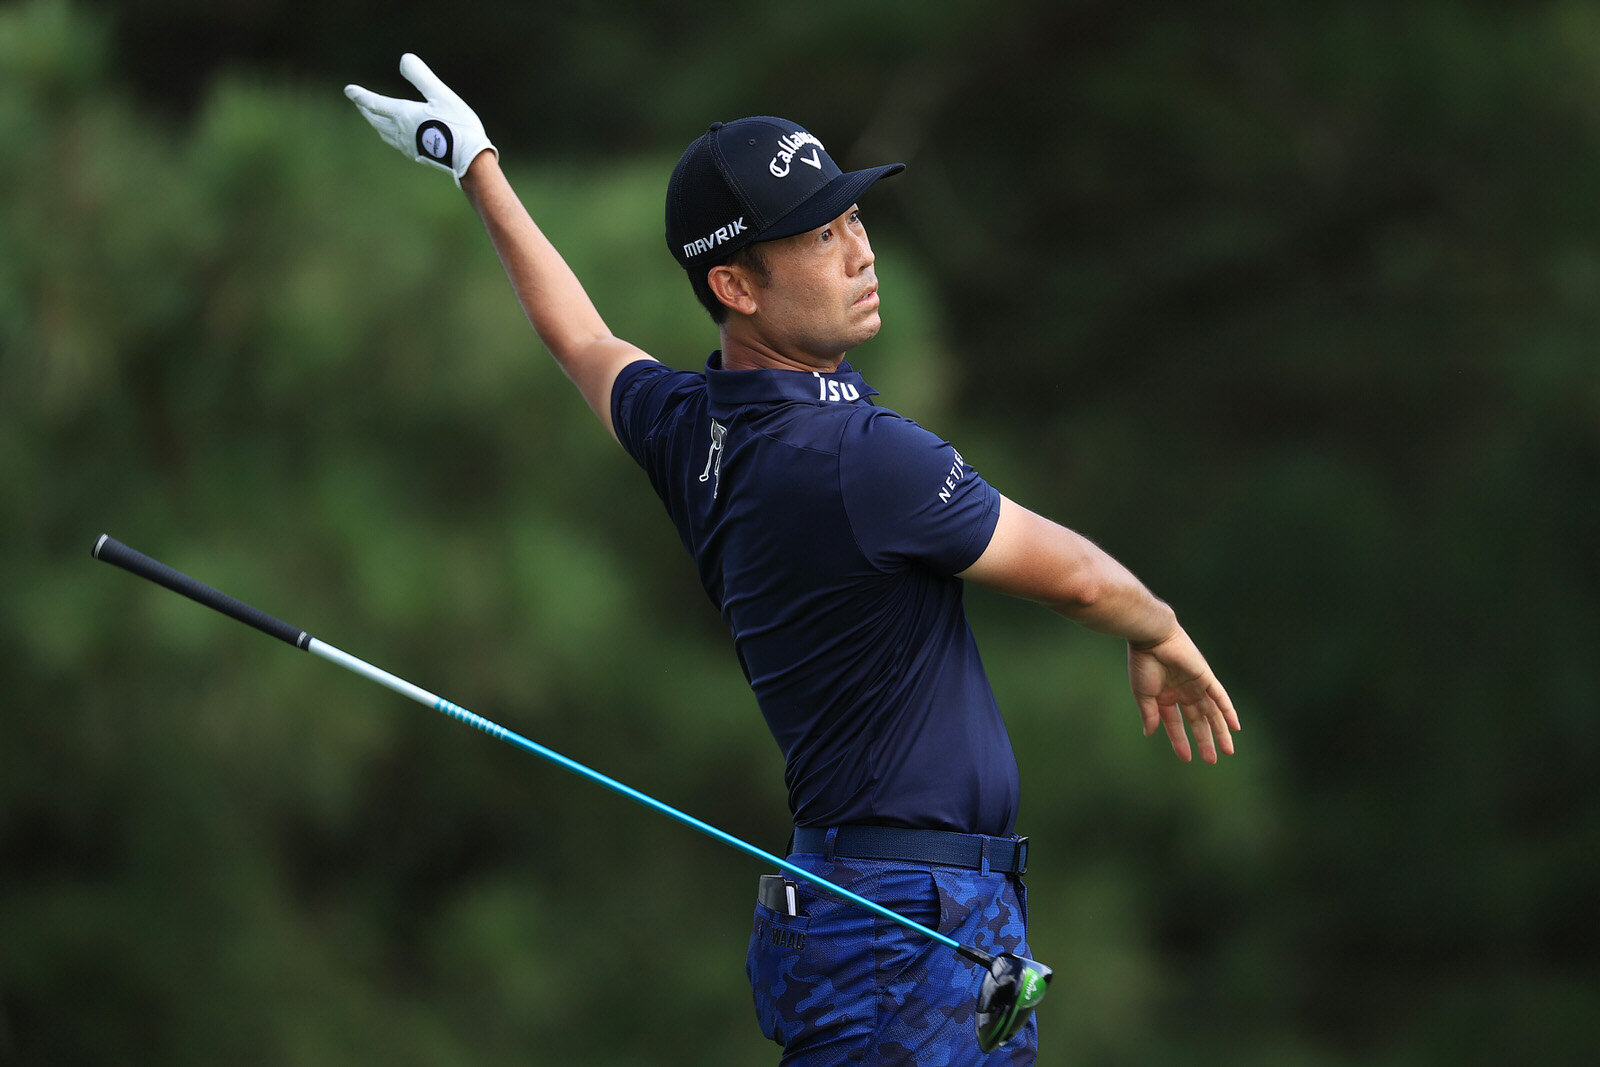  MEMPHIS, TENNESSEE - JULY 30: Kevin Na of the United States plays his shot from the 17th tee during the first round of the World Golf Championship-FedEx St Jude Invitational at TPC Southwind on July 30, 2020 in Memphis, Tennessee. (Photo by Andy Lyo